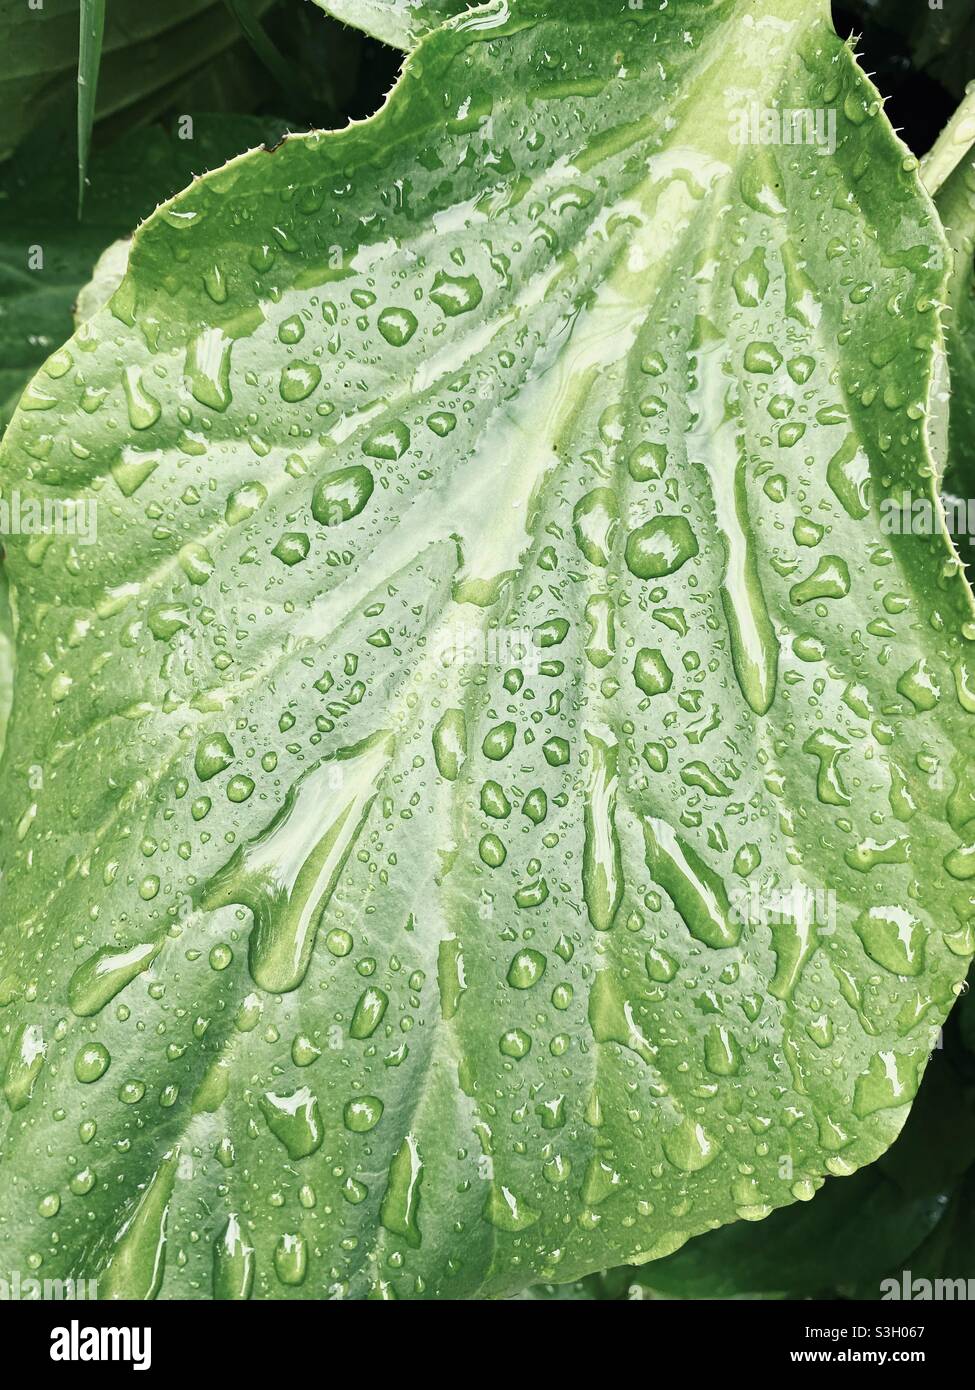 Rain Water drops on a green leaf nature photography Stock Photo